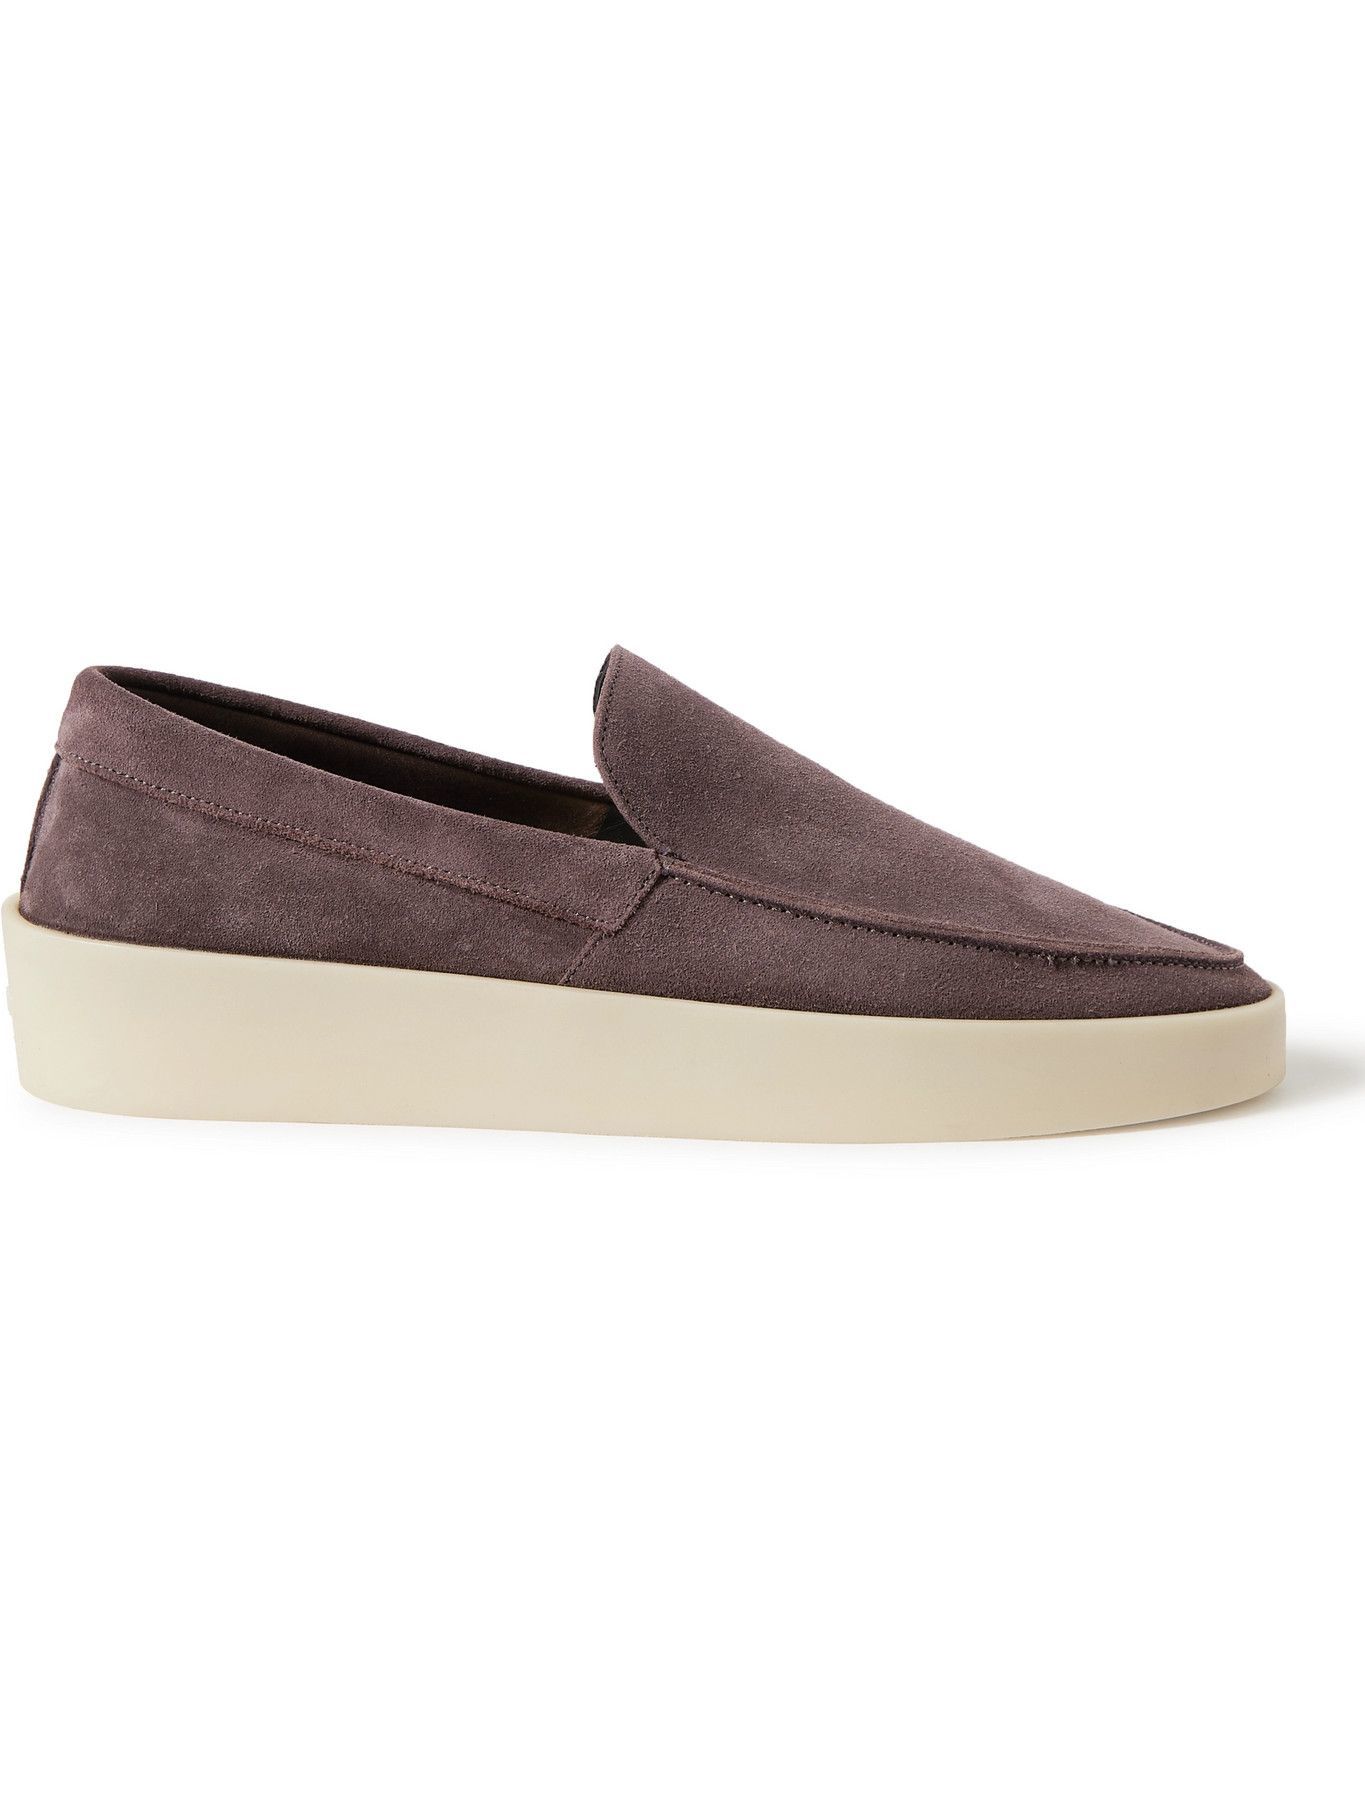 FEAR OF GOD - Reverse Suede Loafers - Brown Fear Of God